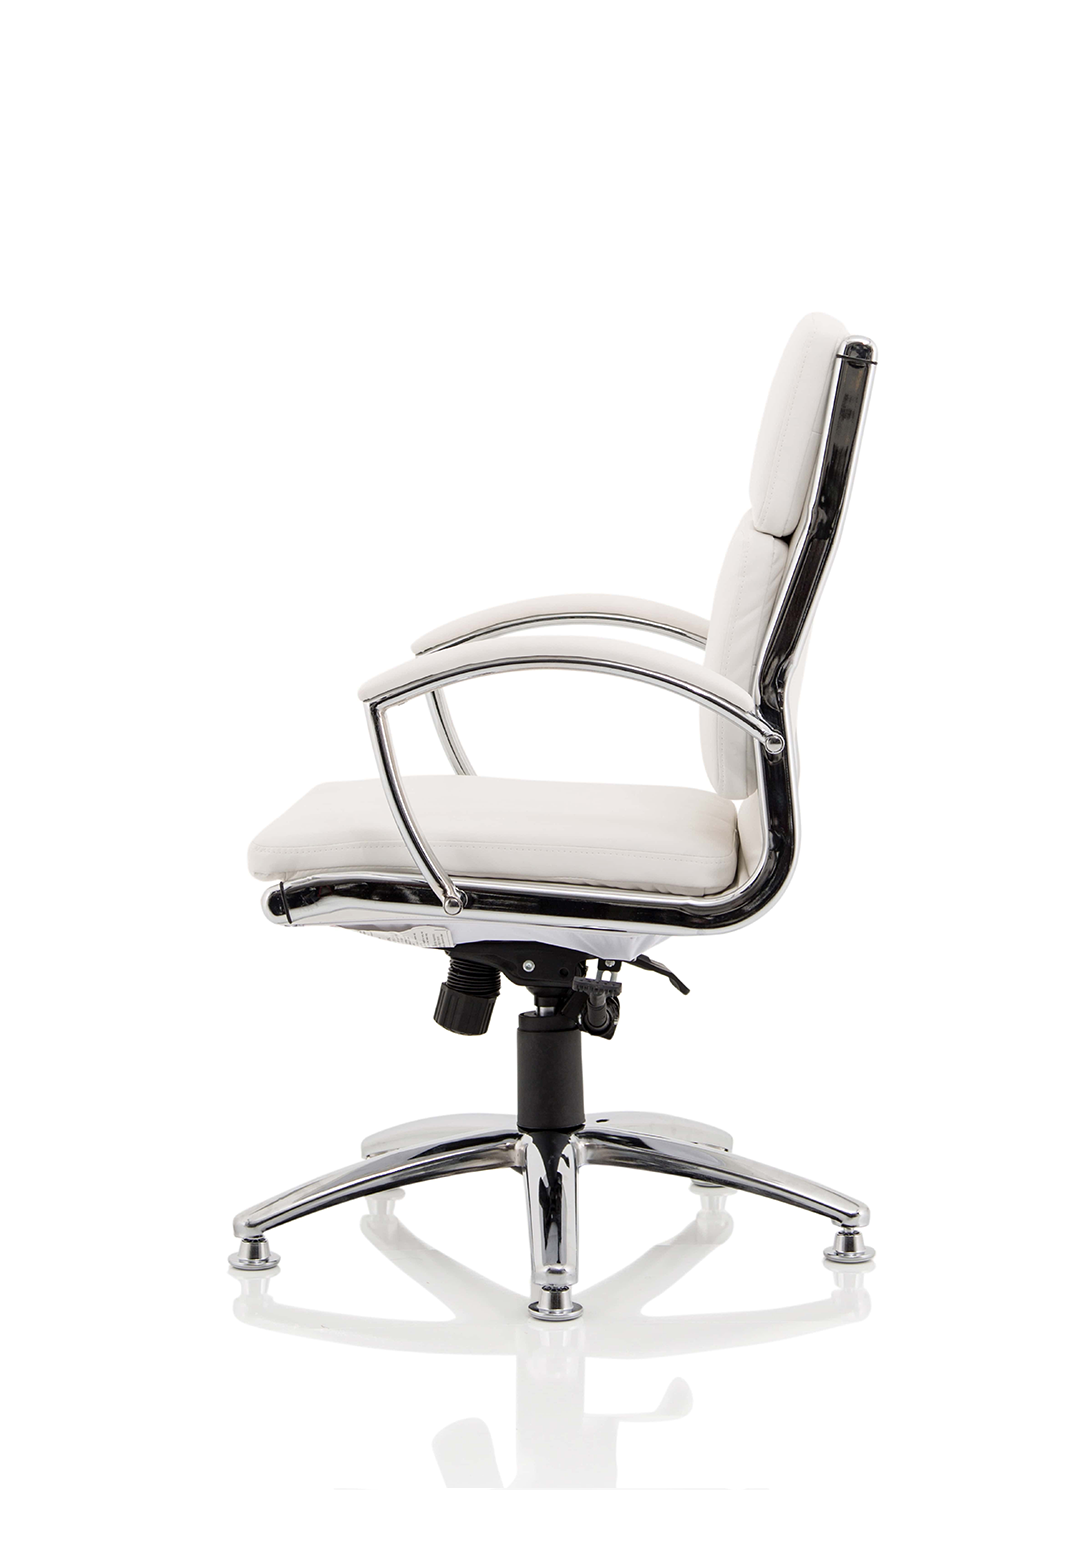 Classic Exec Home Office Chair | Executive Chair | Home Office Furniture | Swivel Chair | Executive Chair | Padded Soft Chair 